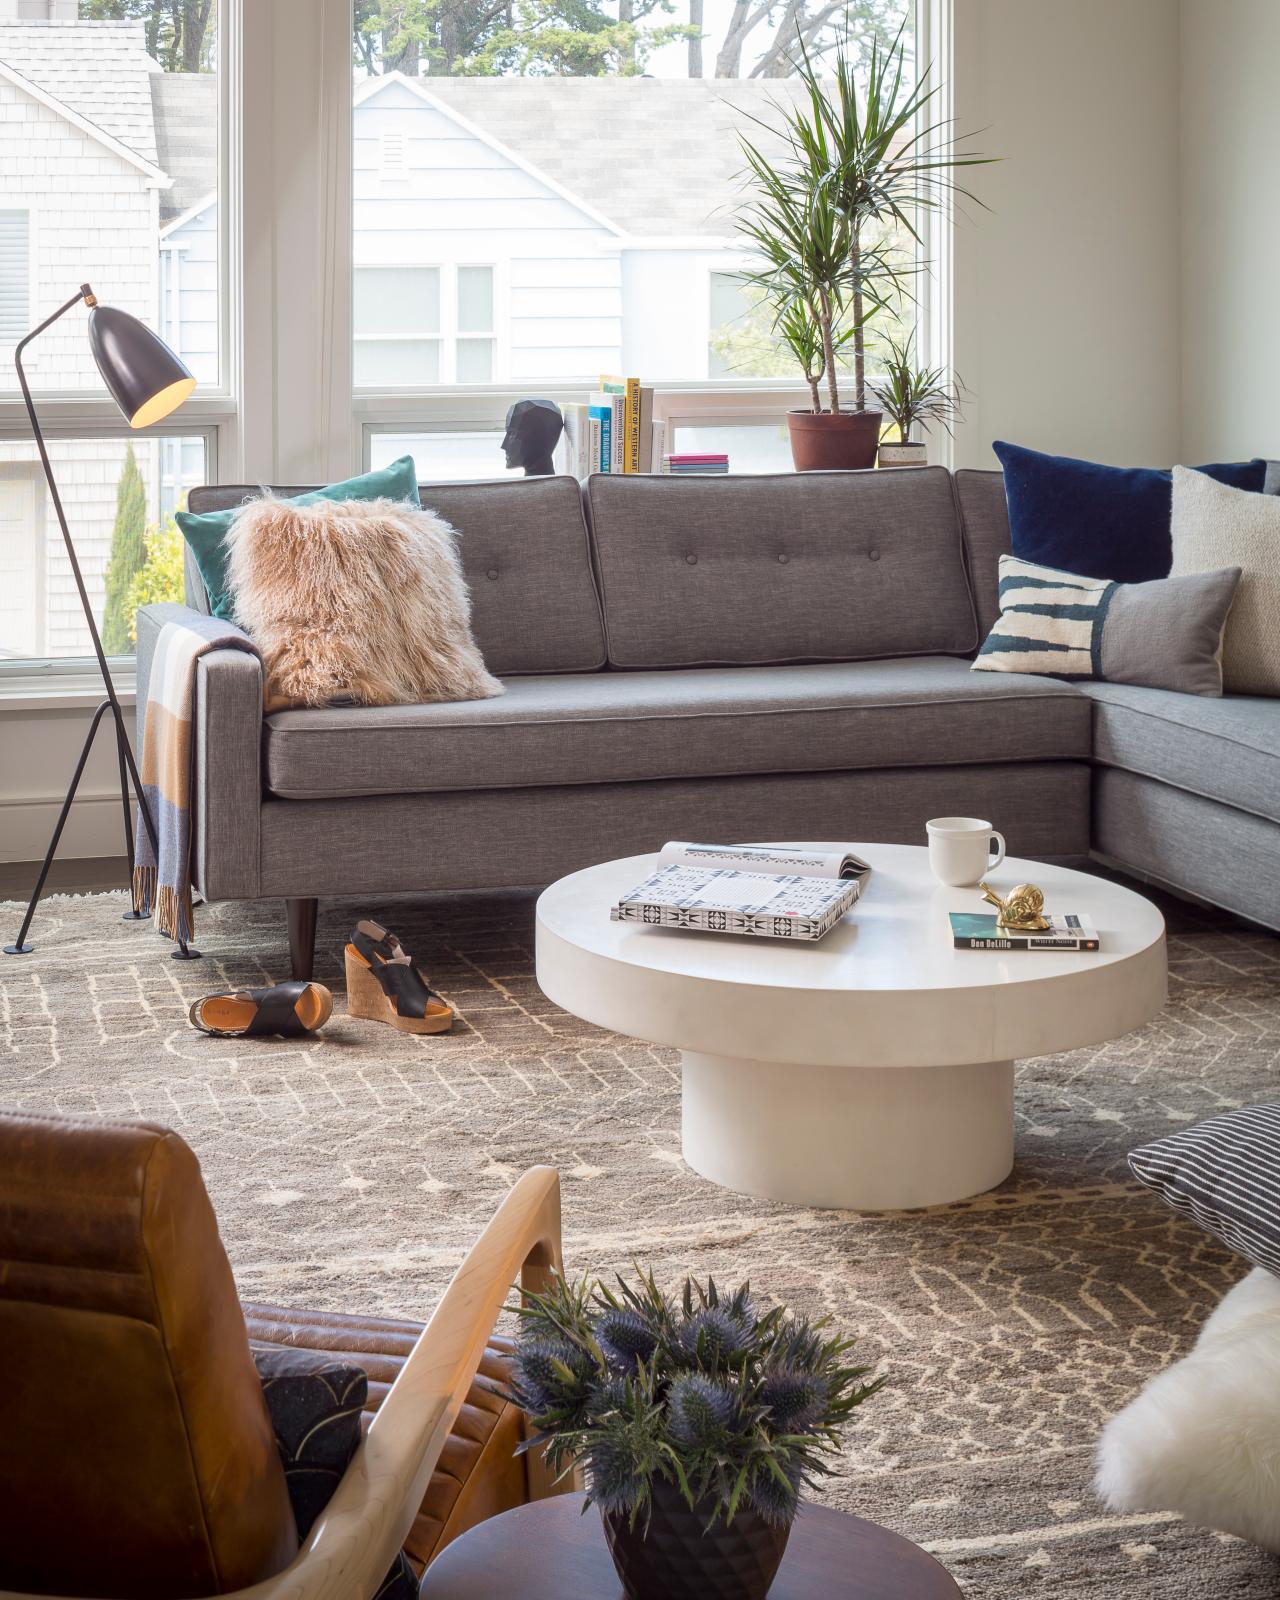 12 living room ideas for a grey sectional | hgtv's decorating